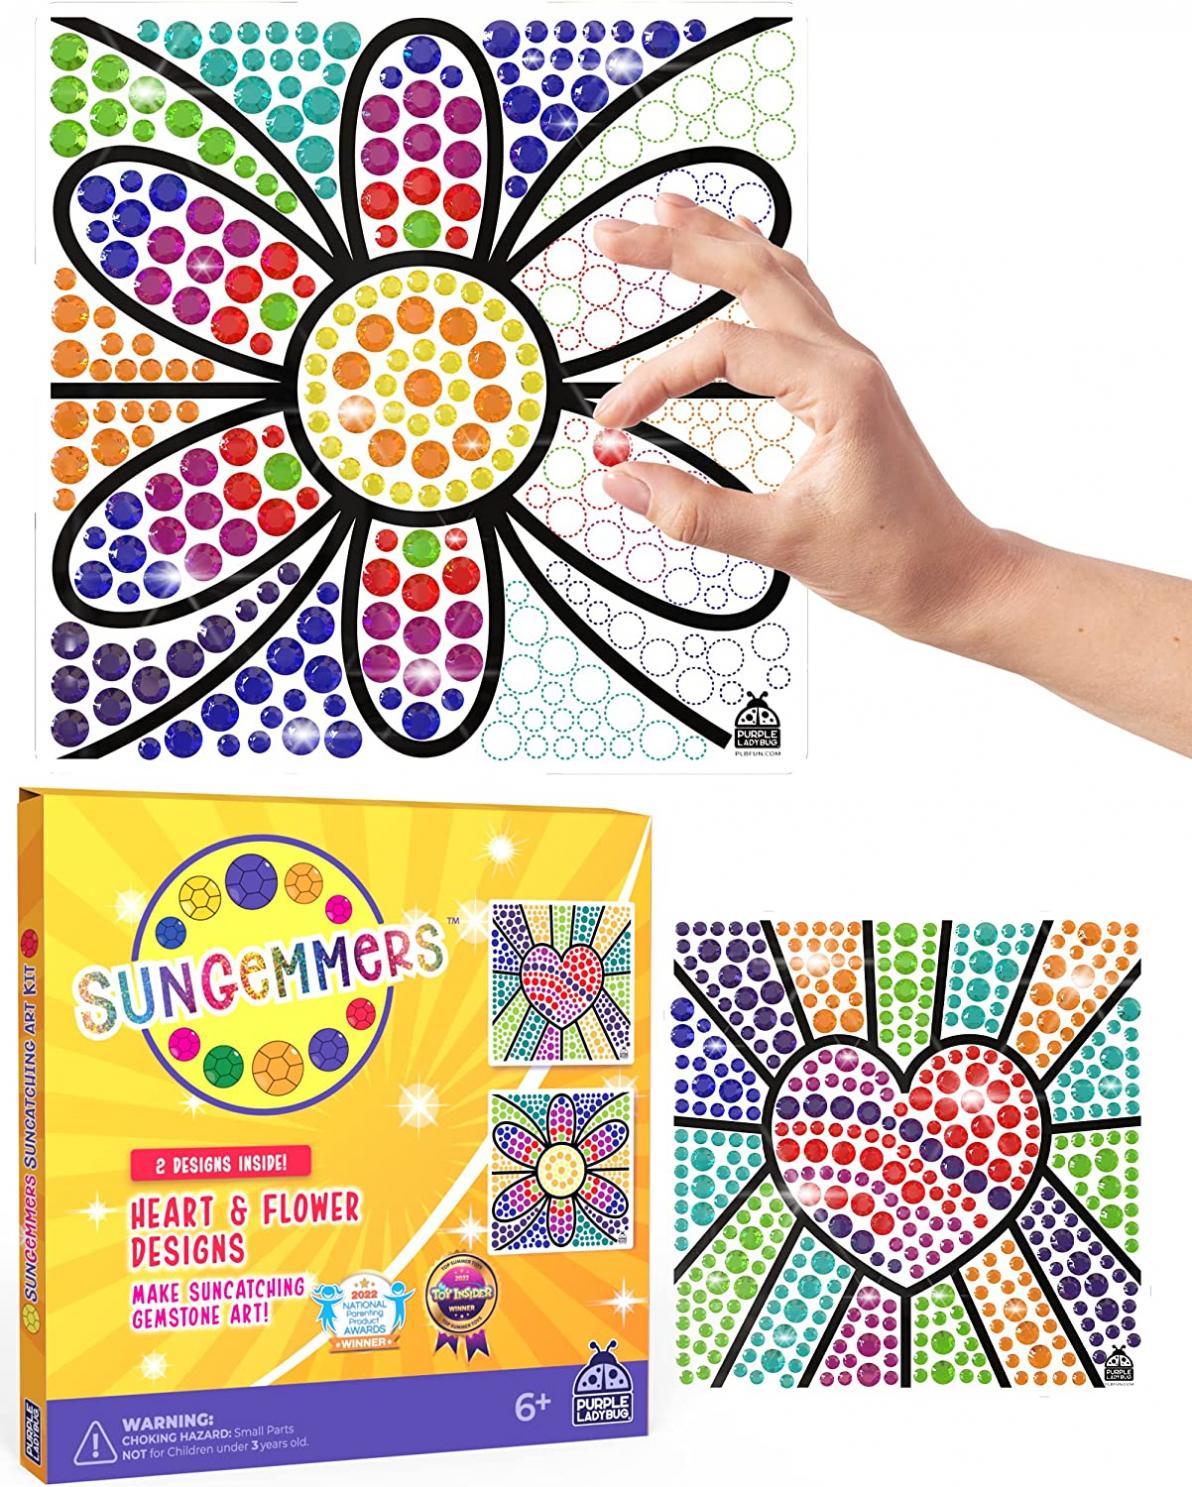 SUNGEMMERS Window Art Suncatcher Kits for Kids Crafts Ages 6-8 + - Great Birthday Gifts for 7 Year Old Girl, Christmas Gifts for Girls & Tweens, Stocking Stuffers for Kids, Fun Kids Arts and Crafts